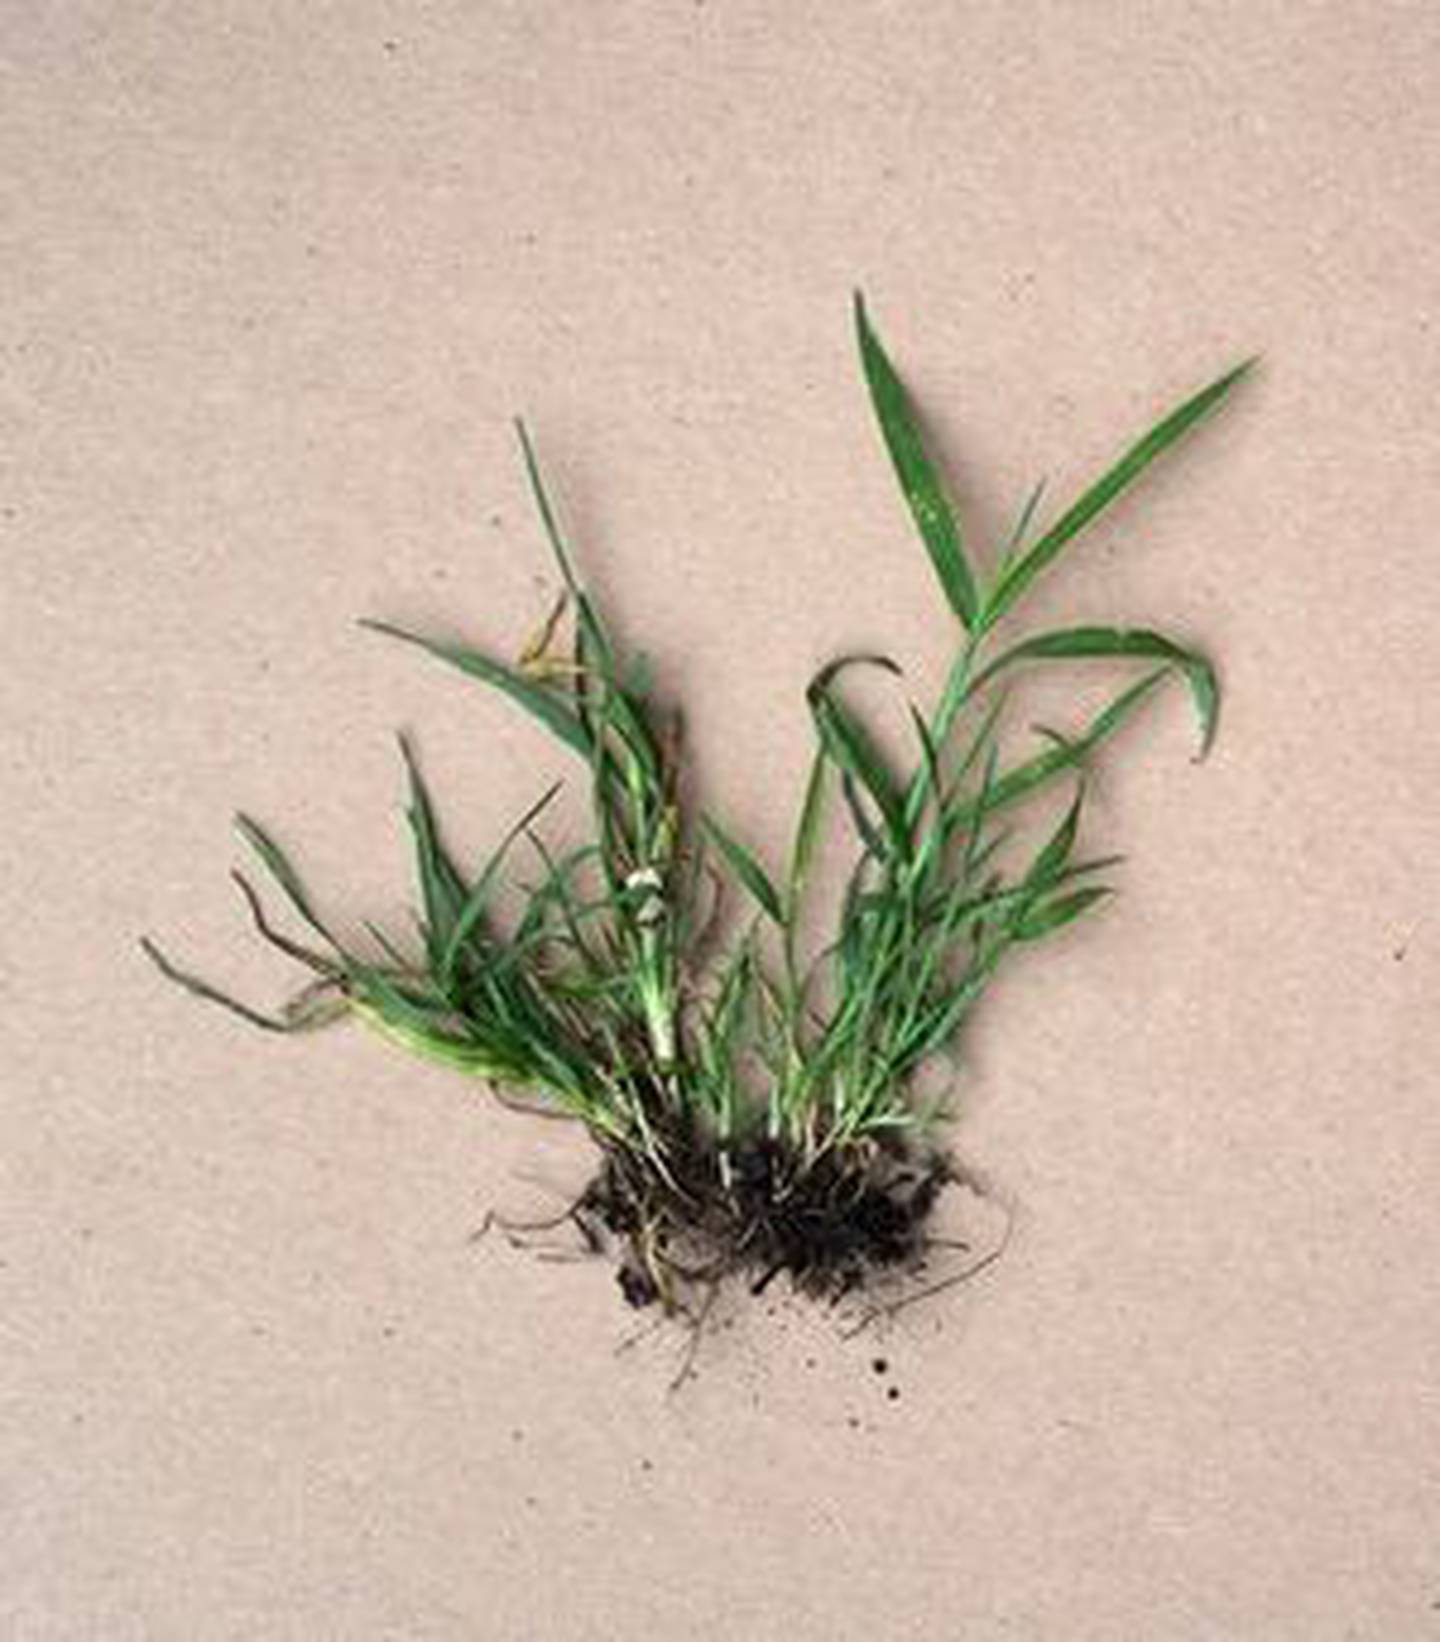 Crabgrass can grow in areas where dirt is compounded, which is why you often see it at the edge of the lawn or on the edges of the driveway.  To keep it from spreading, cut the rosette off before it flowers.  Mowing will not do the job because this weed is below blade height.